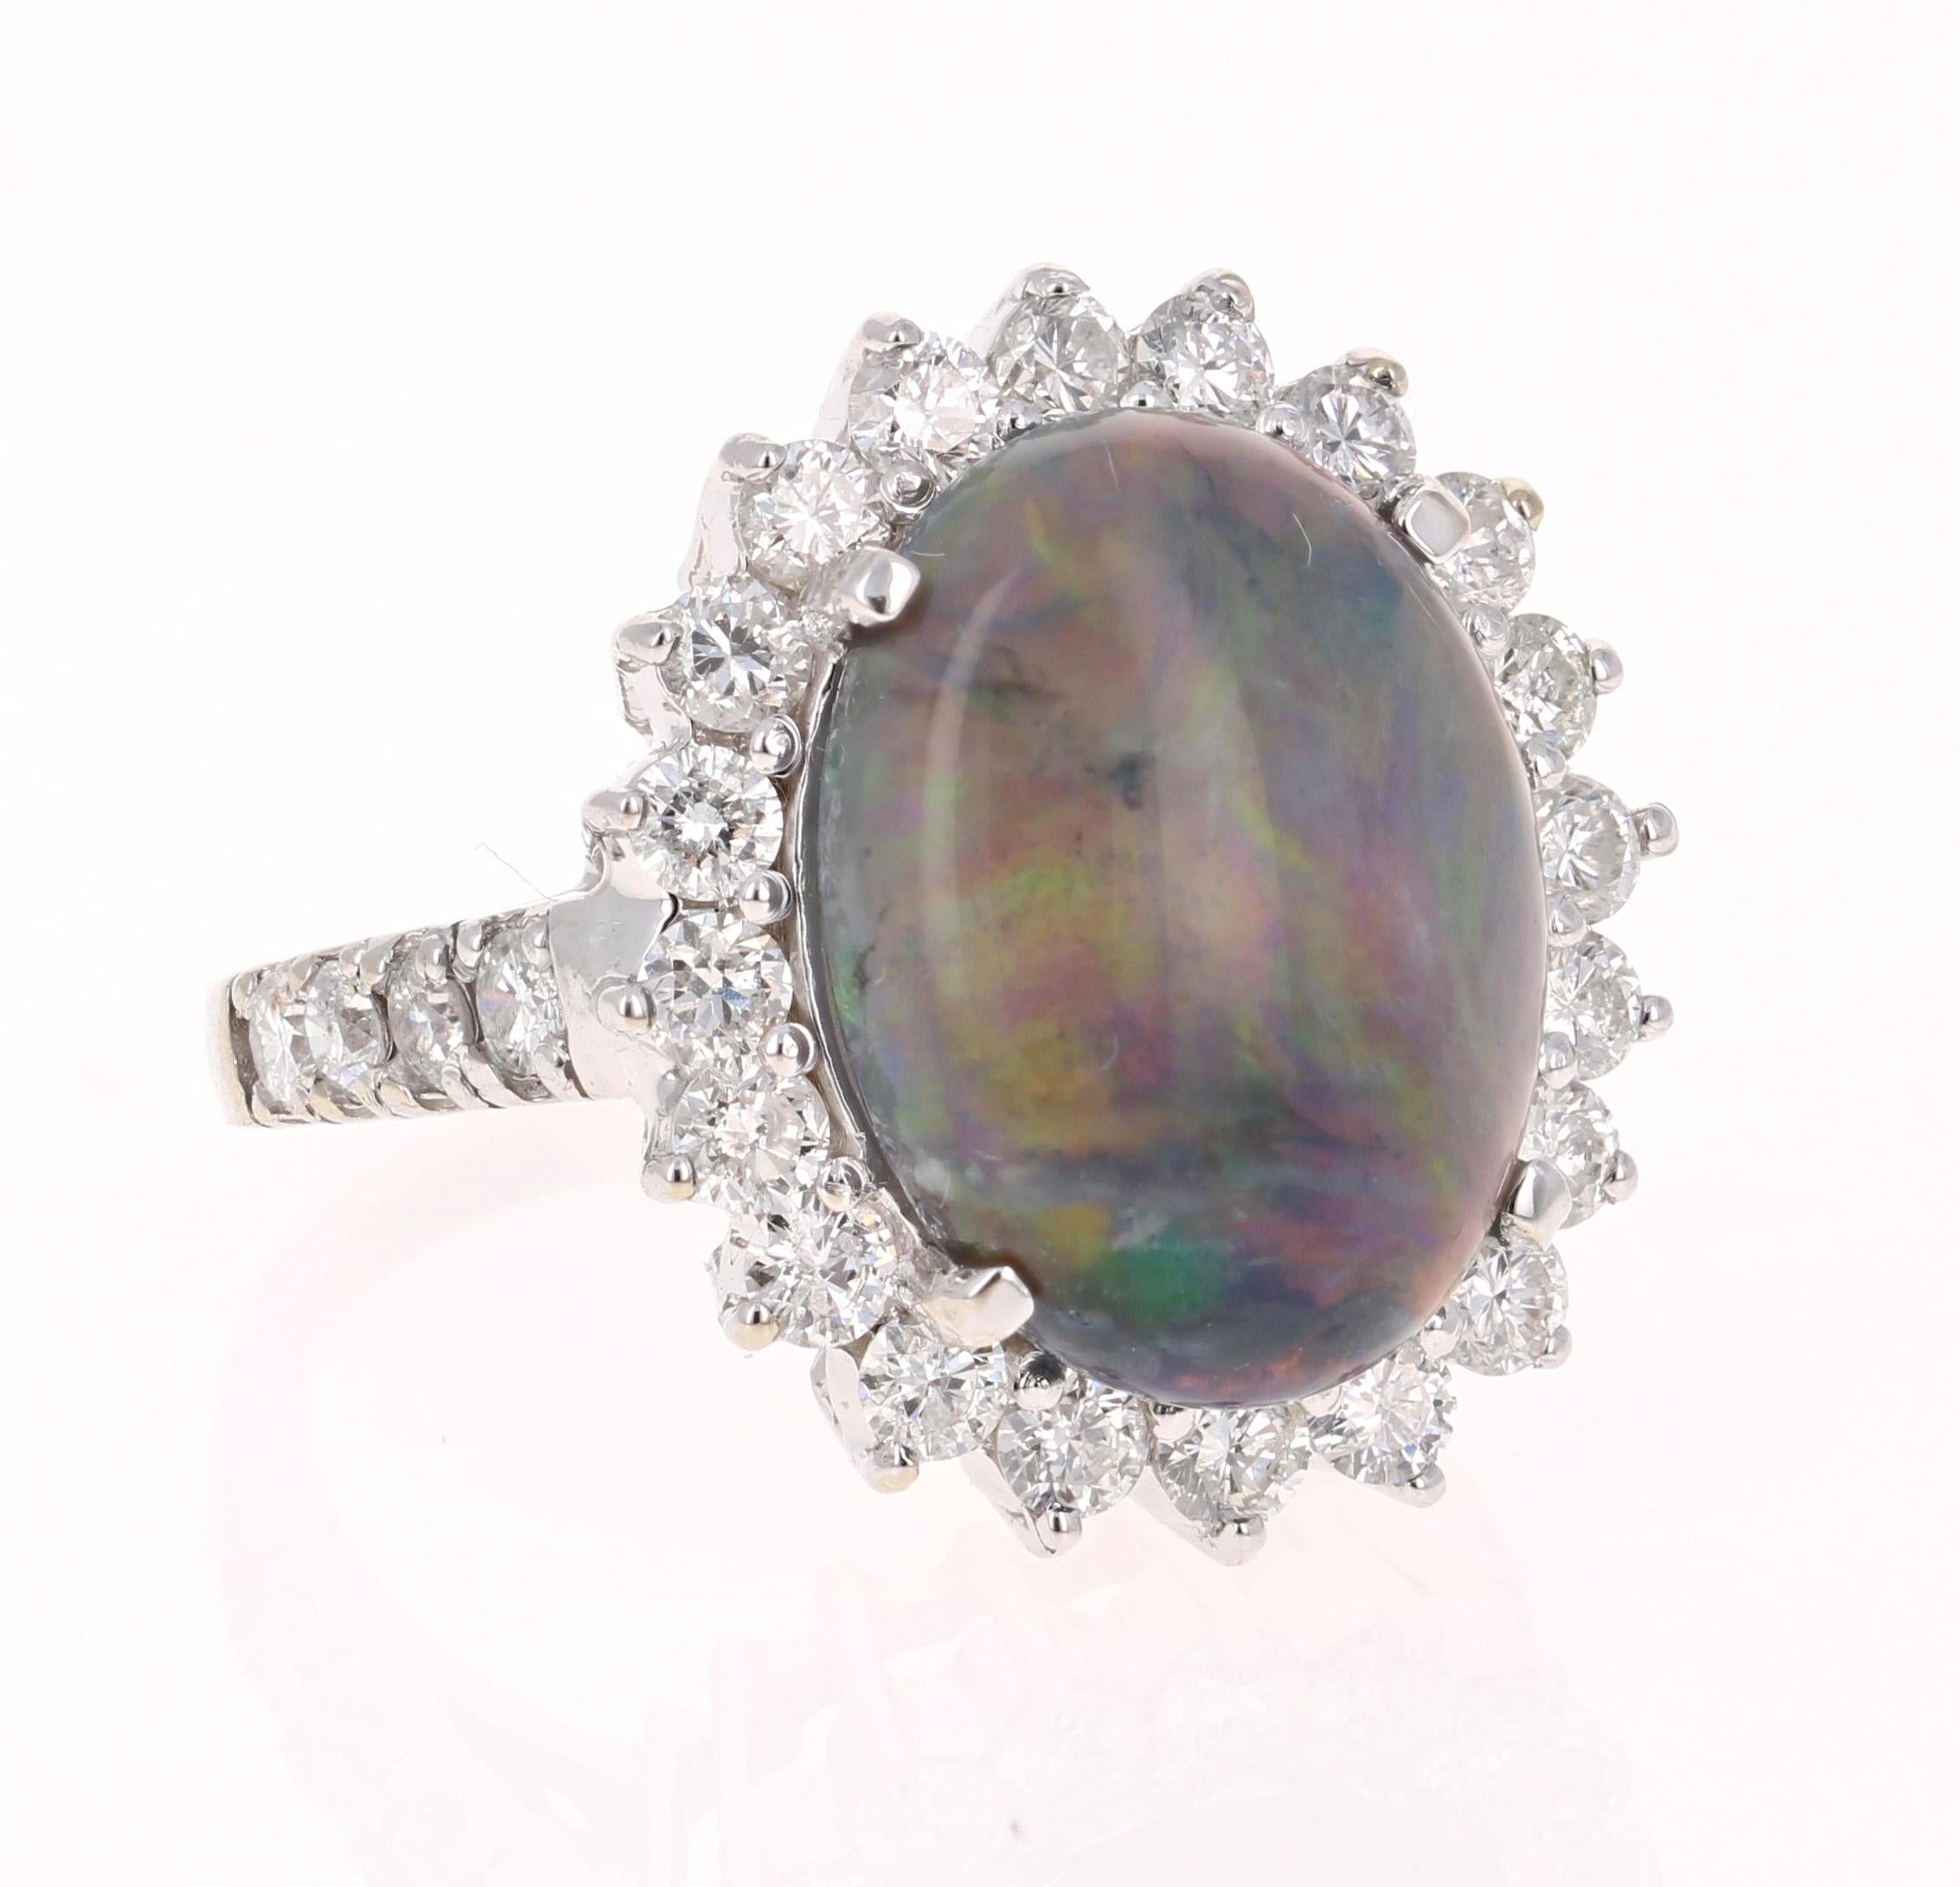 One of A Kind Opulent Black Opal Diamond Ring! 

This ring has a 5.49 Carat Opal that is curated in a classic 14 Karat White Gold setting. The setting is adorned with 28 Round Cut Diamonds that weigh 1.57 Carats. The total carat weight of the ring